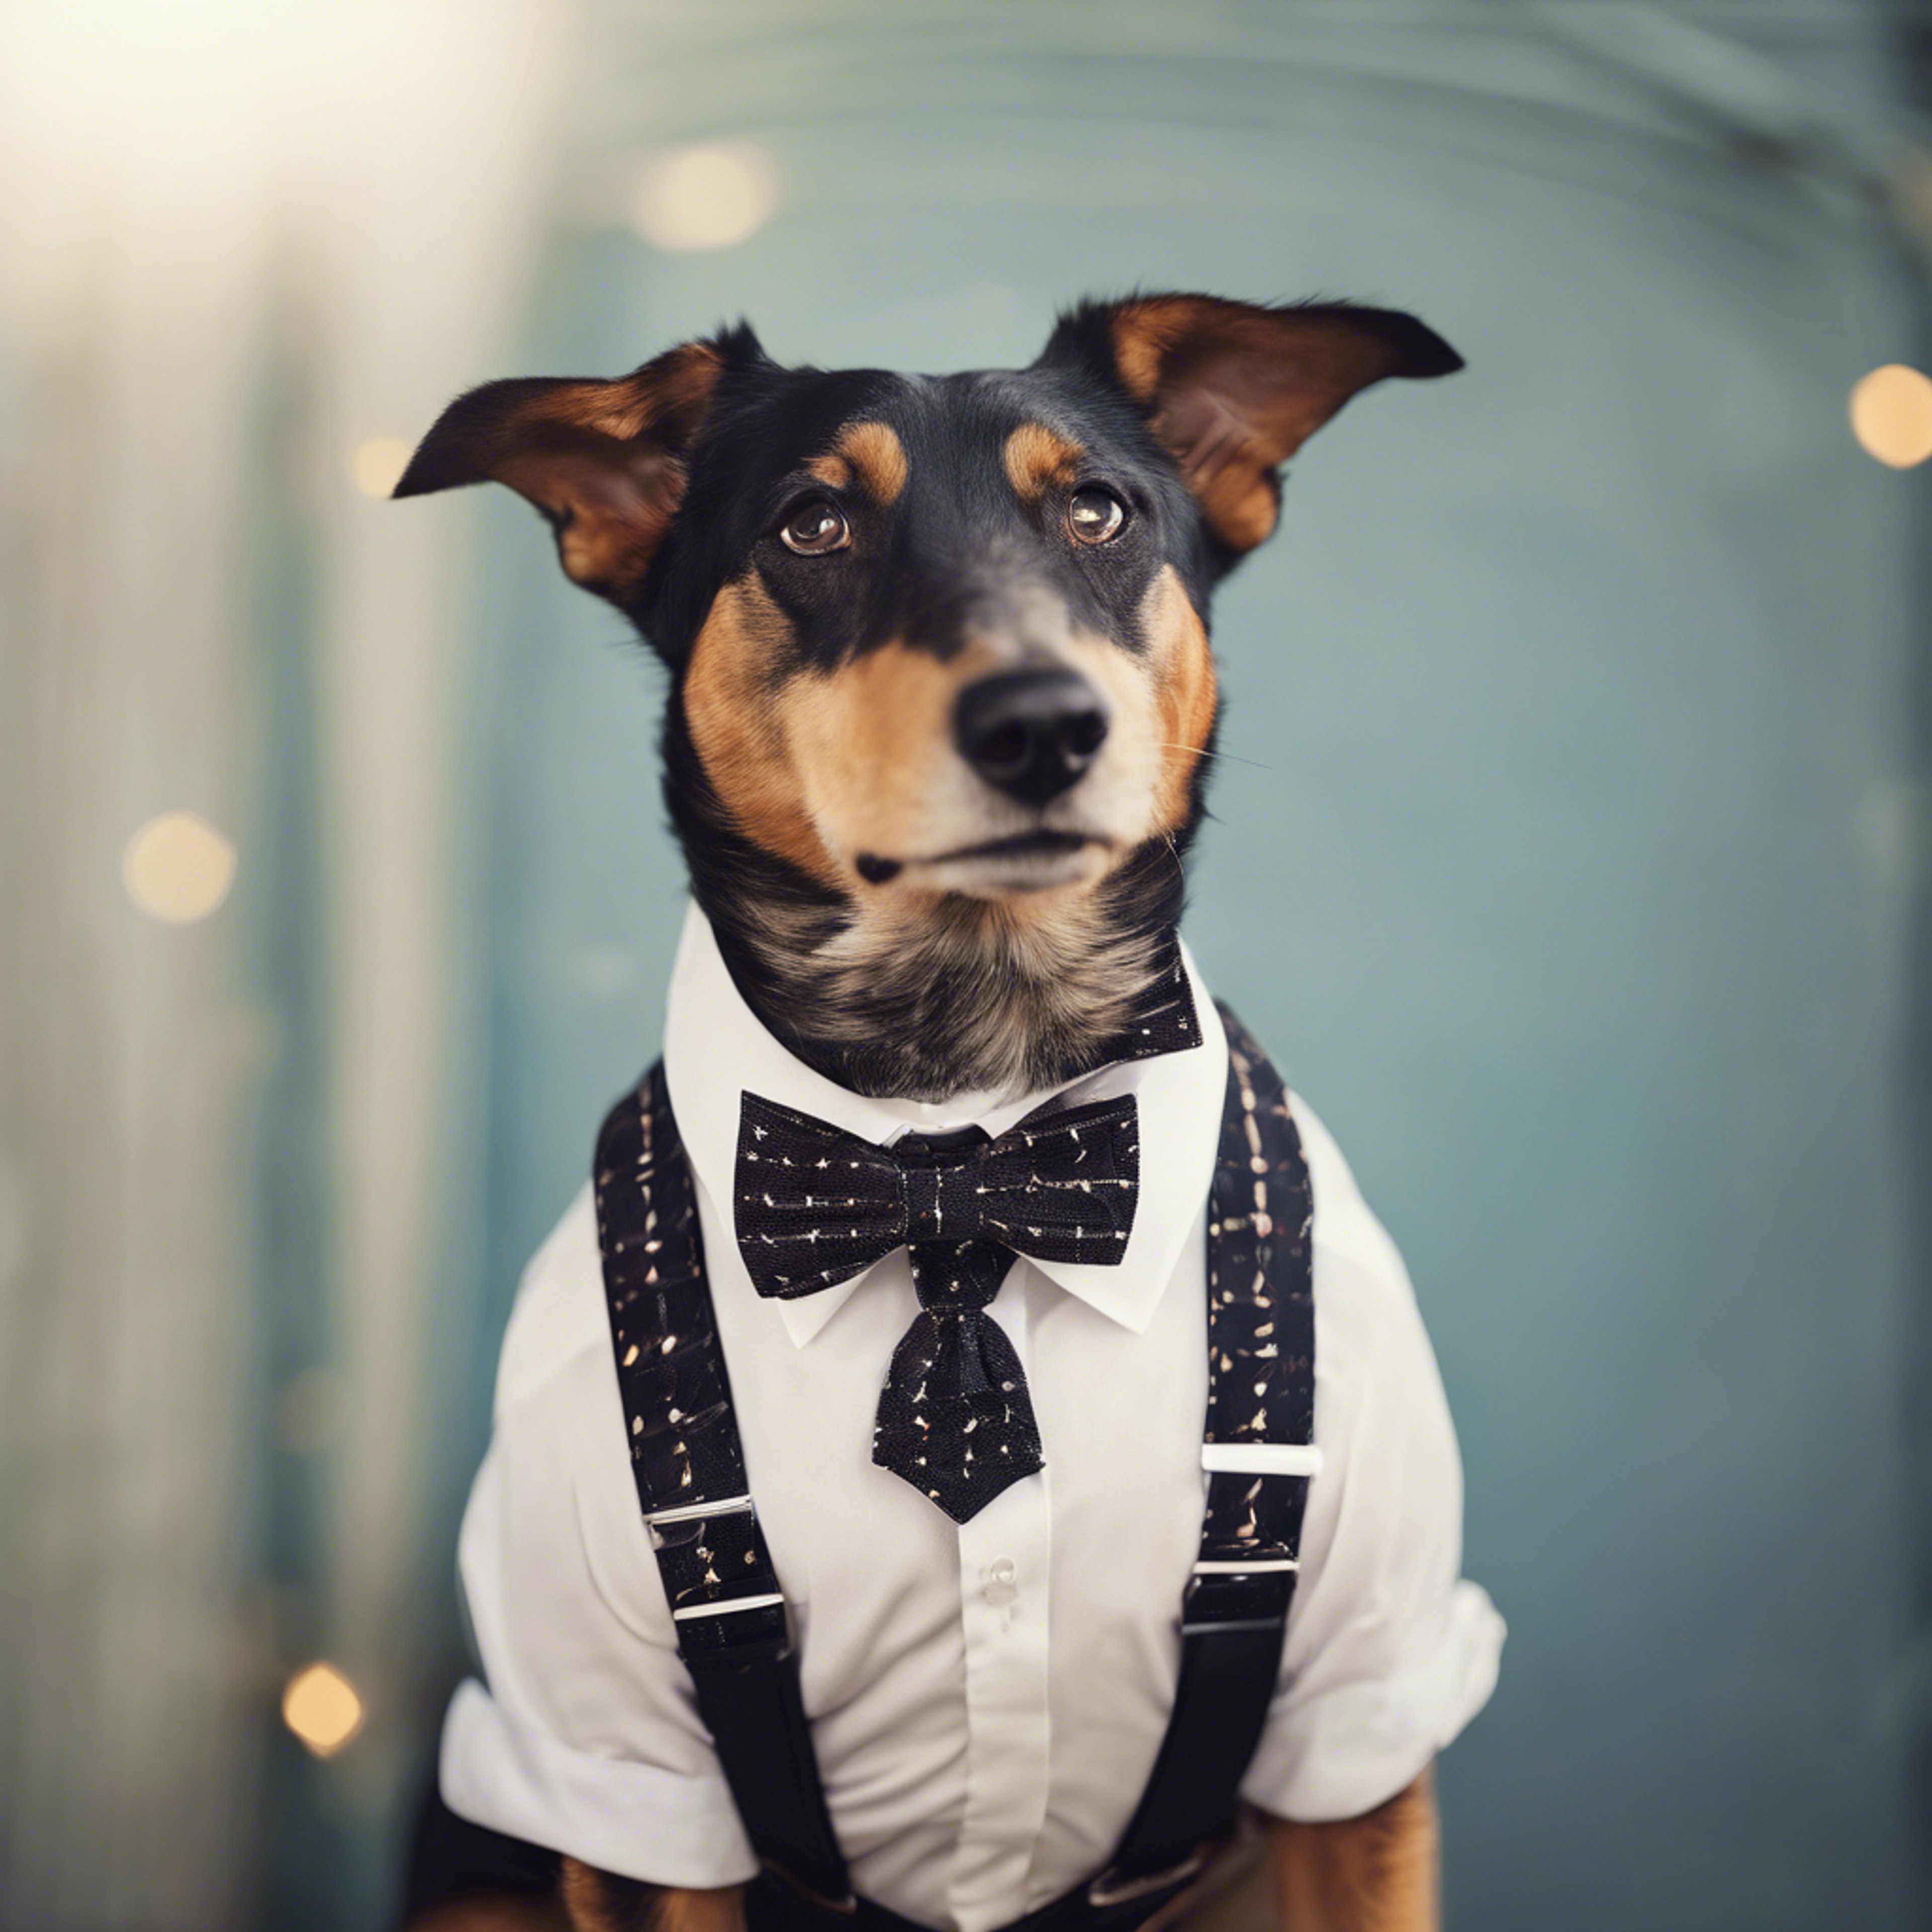 A dapper dog dressed in a cute retro-style outfit, featuring suspenders and bow tie. Wallpaper[69a1531fb80543609416]